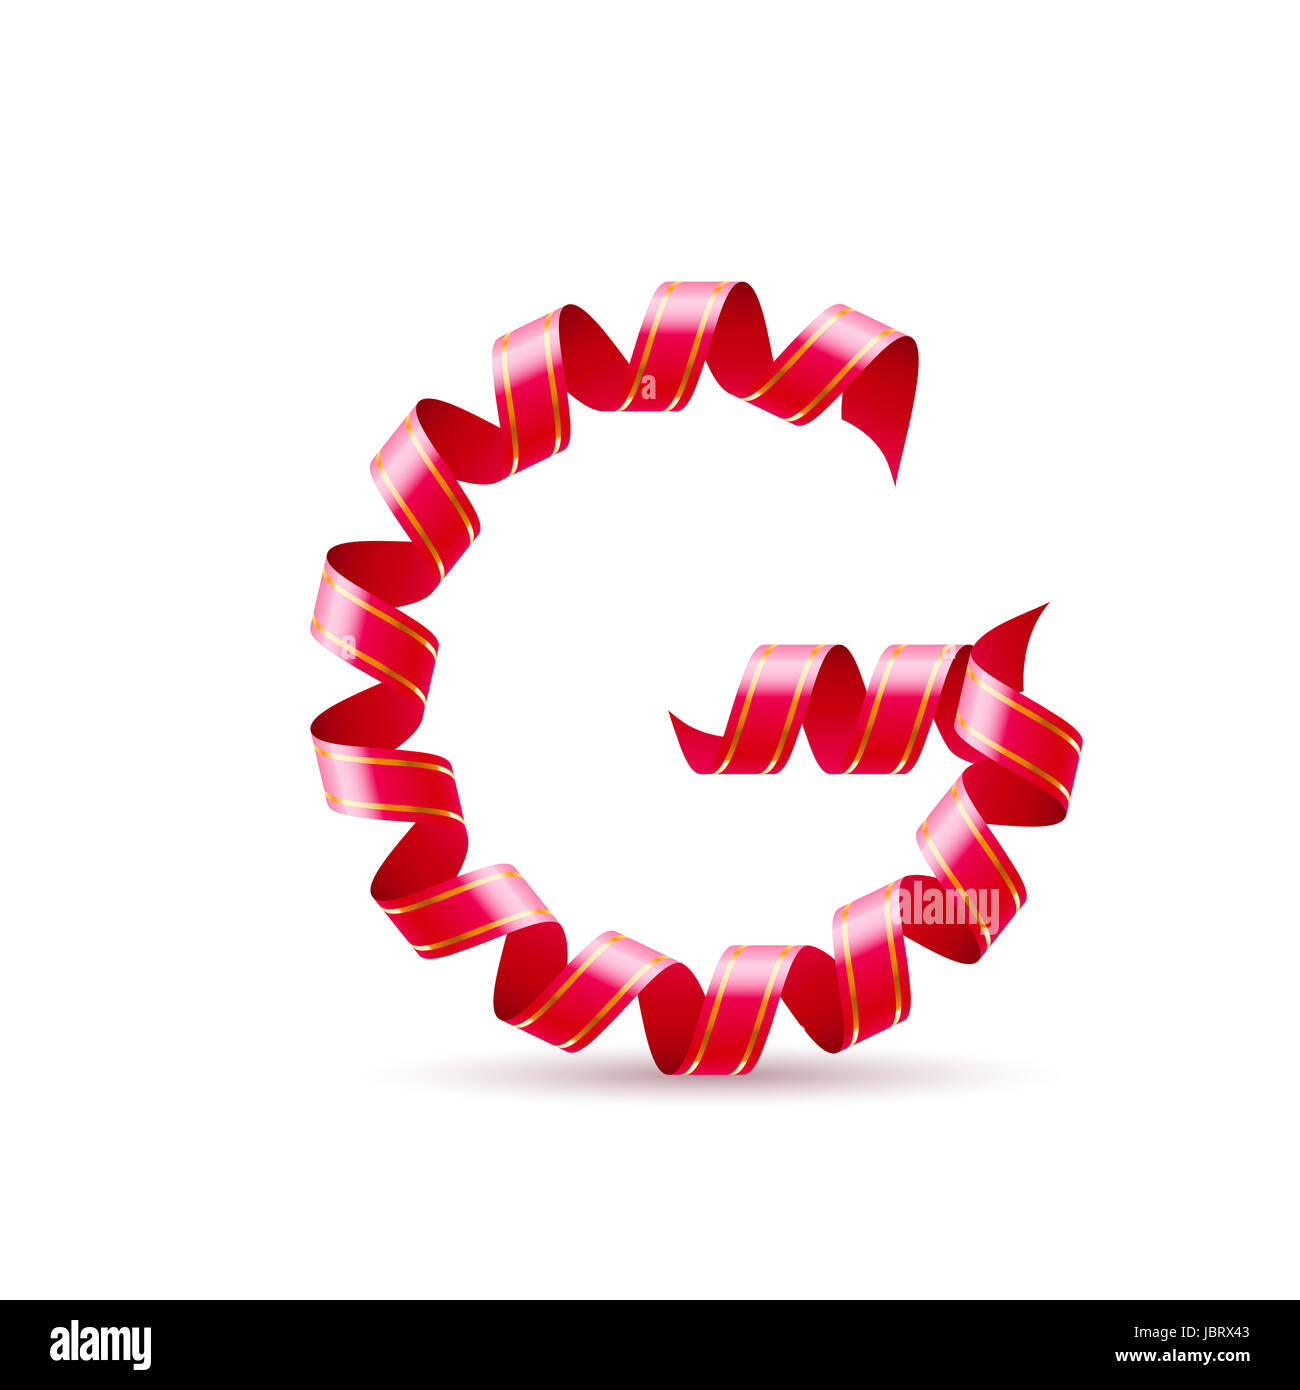 Letter G made of red curled shiny ribbon Stock Photo